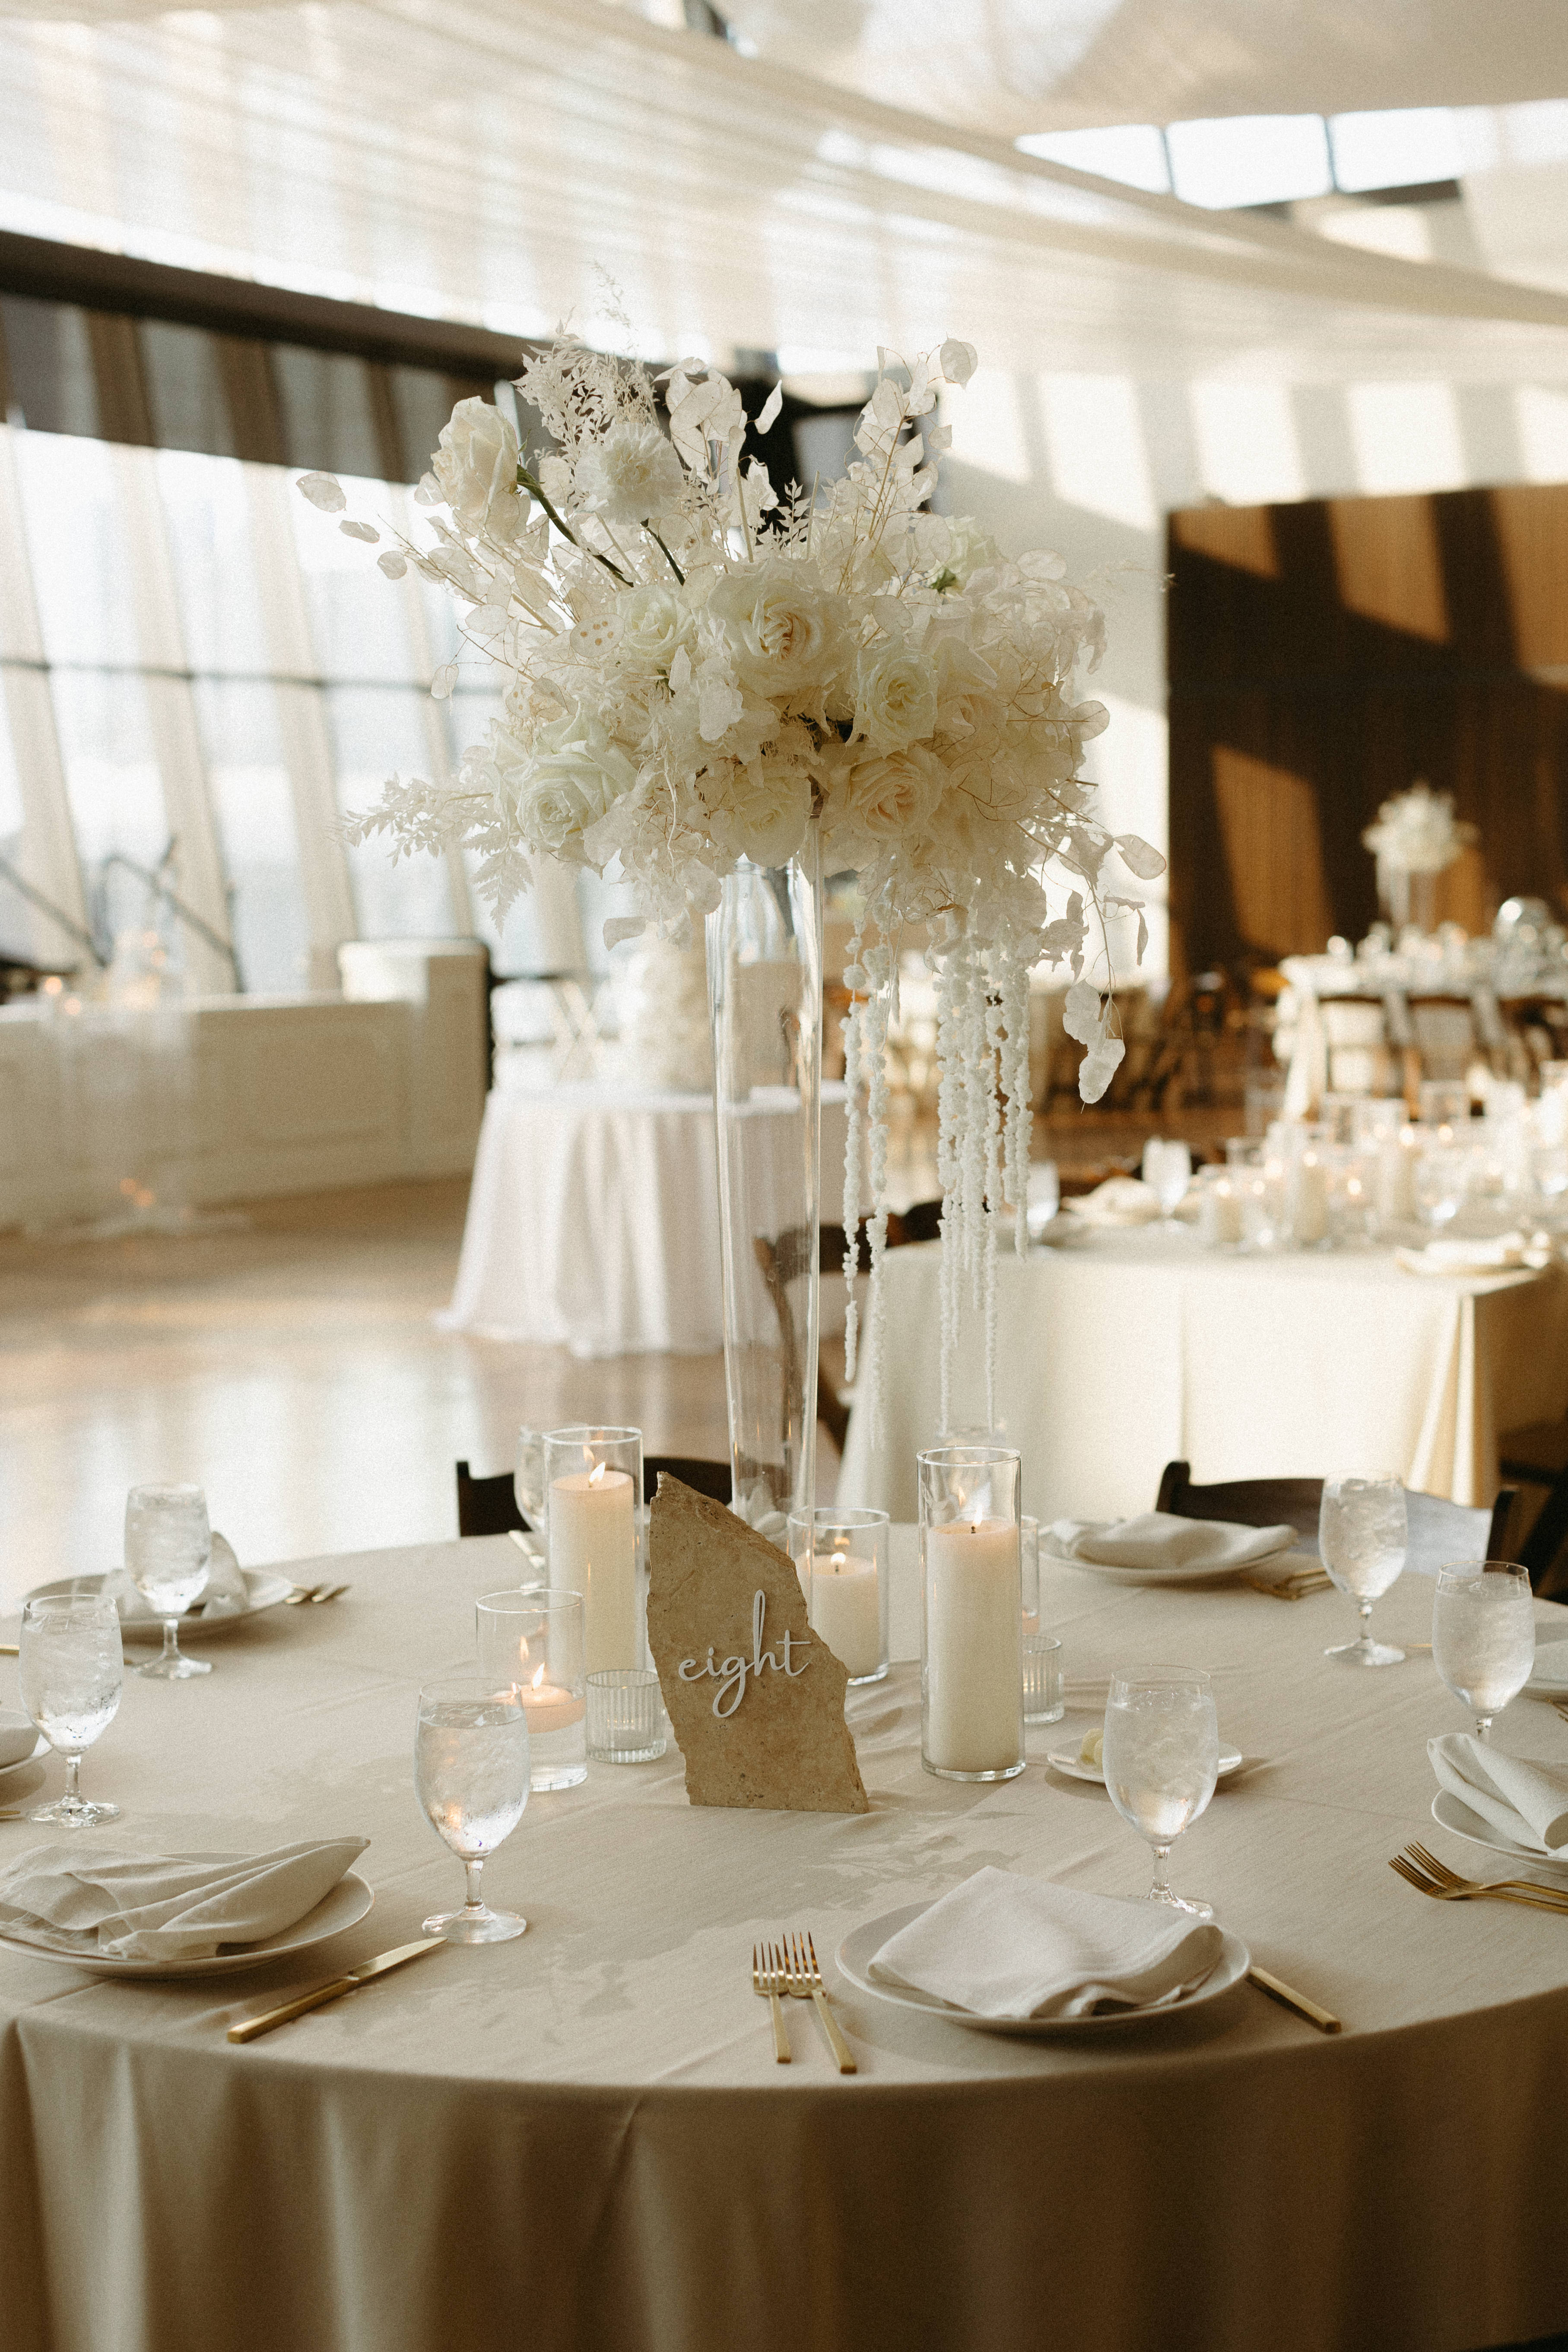 Stone table number atop formal tablescape with white florals and linen.